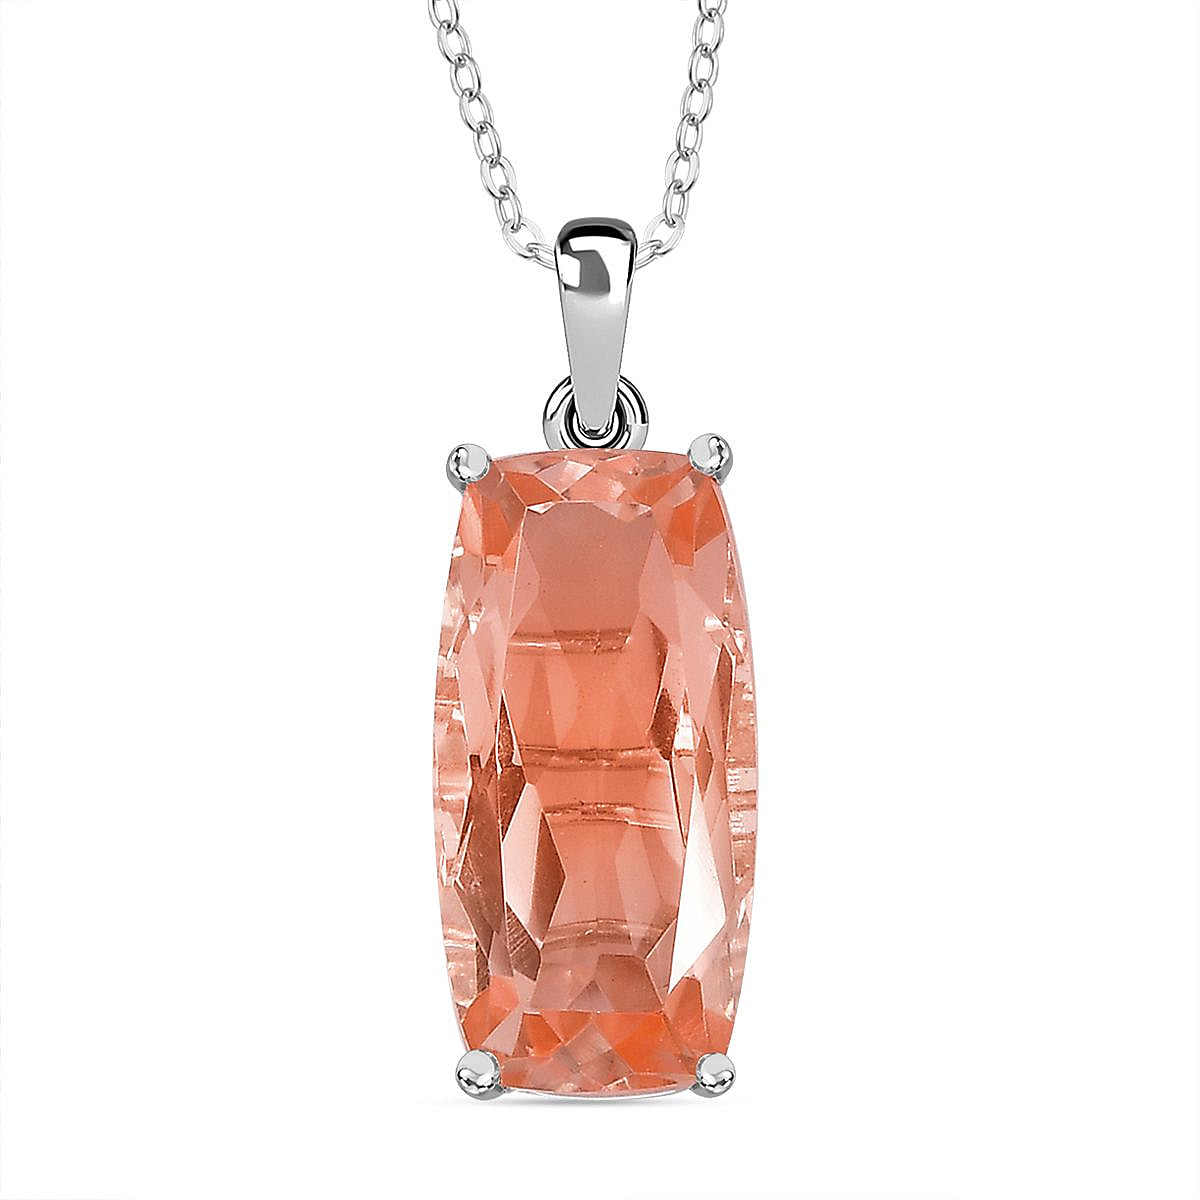 Morganite Triplet Quartz Solitaire Pendant with Chain (Size 20) in Platinum Overlay Sterling Silver 11.50 Ct.